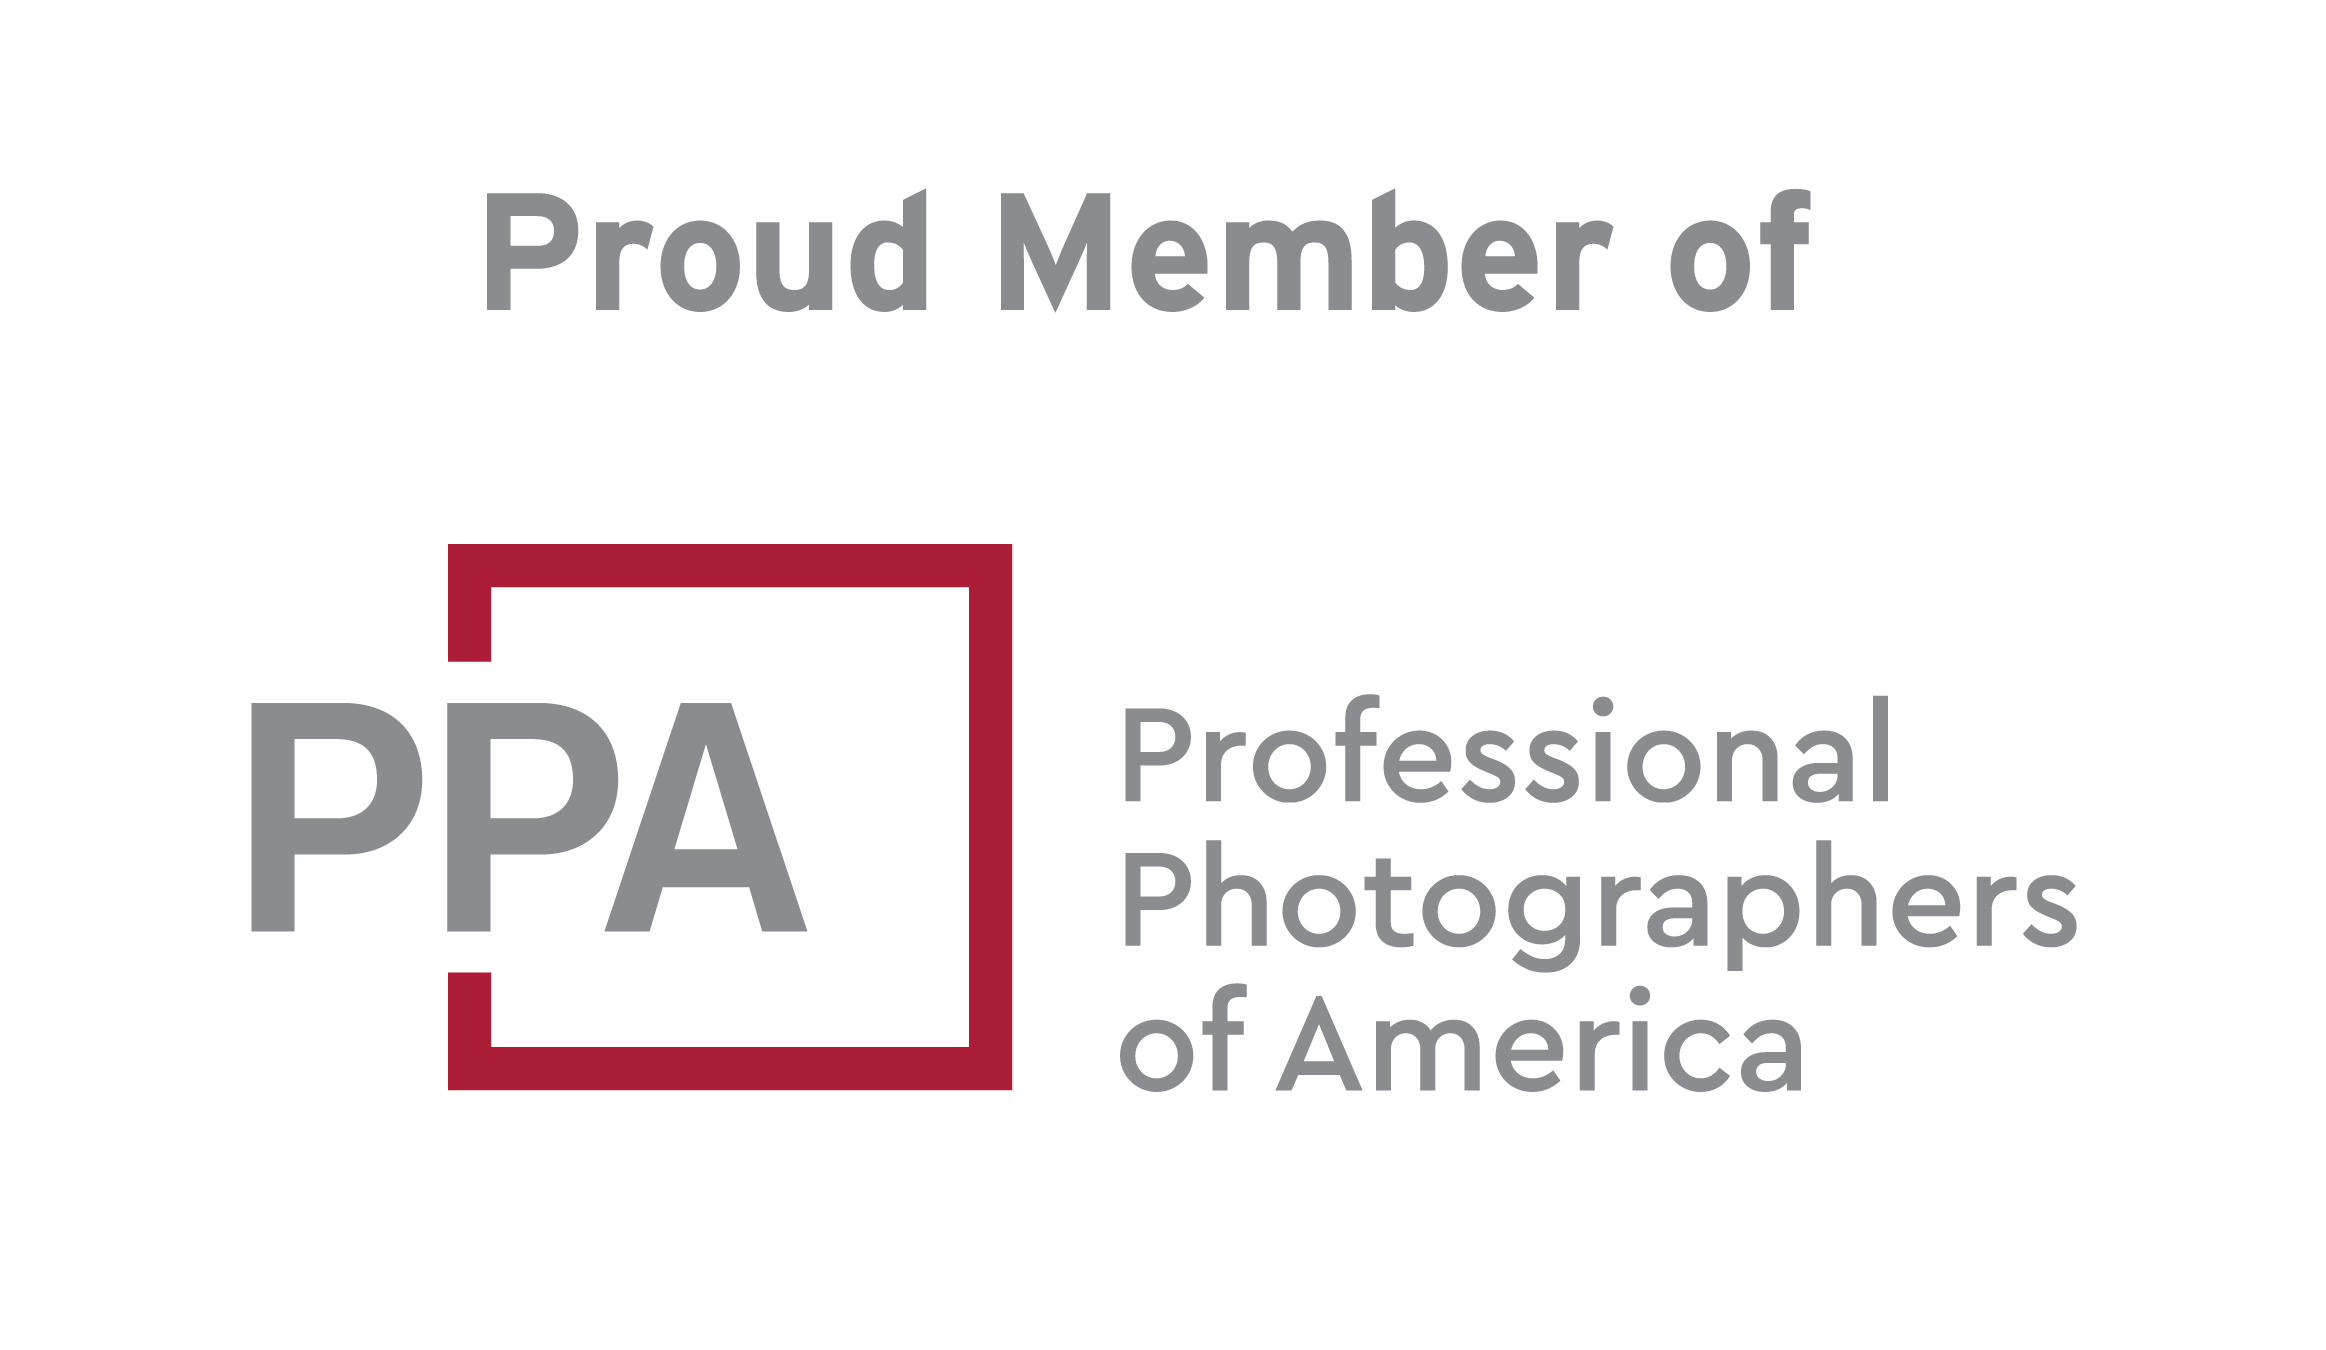 PPA, Professional Photographers of America, helps photographers grow their practices, exceed customer visions and push the artistic envelope. We are a source for photographic inspiration, protection, and community and photography education.